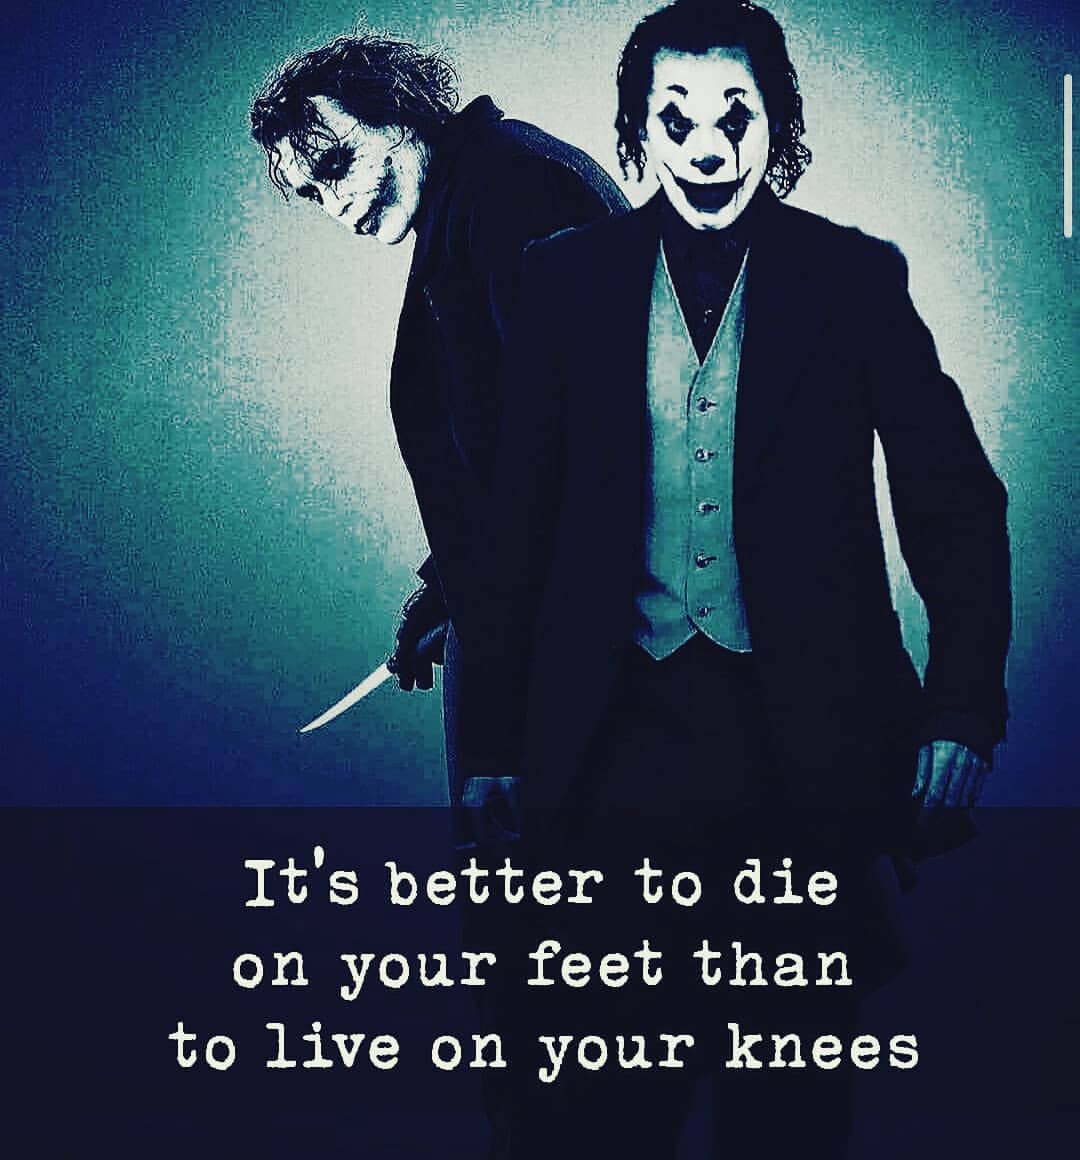 It's better to die on your feet than to live on your knees.